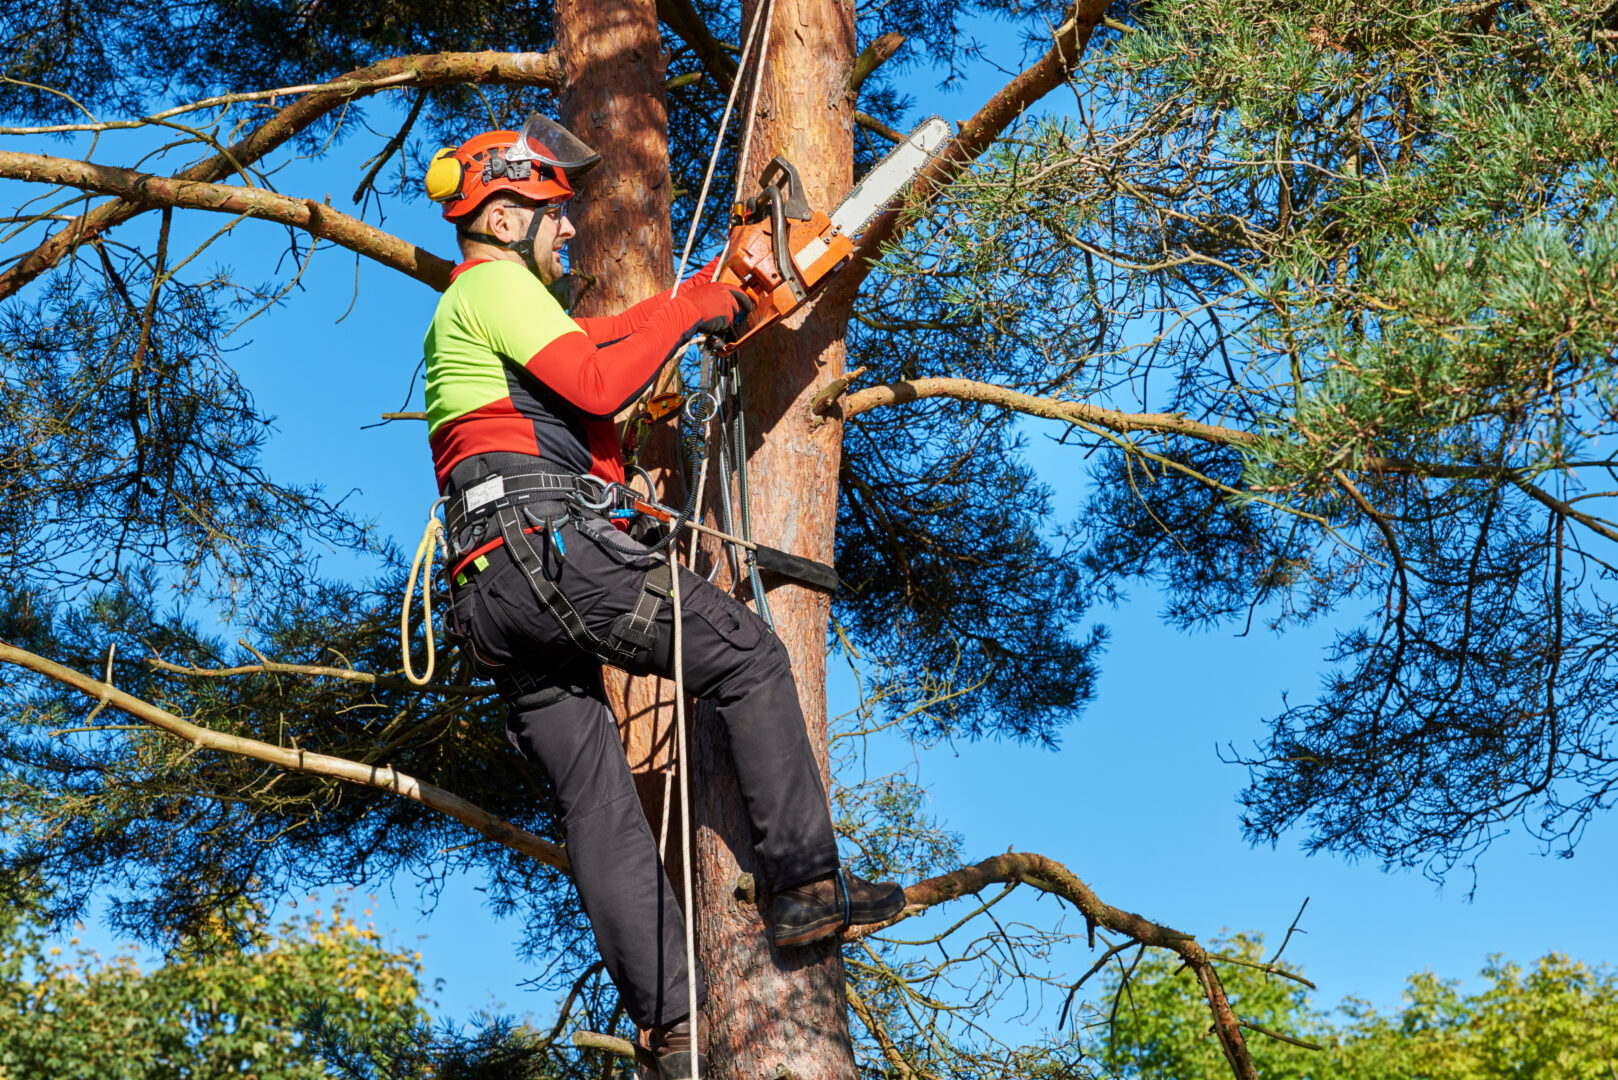 Want to learn to climb trees? Penn State course has you covered